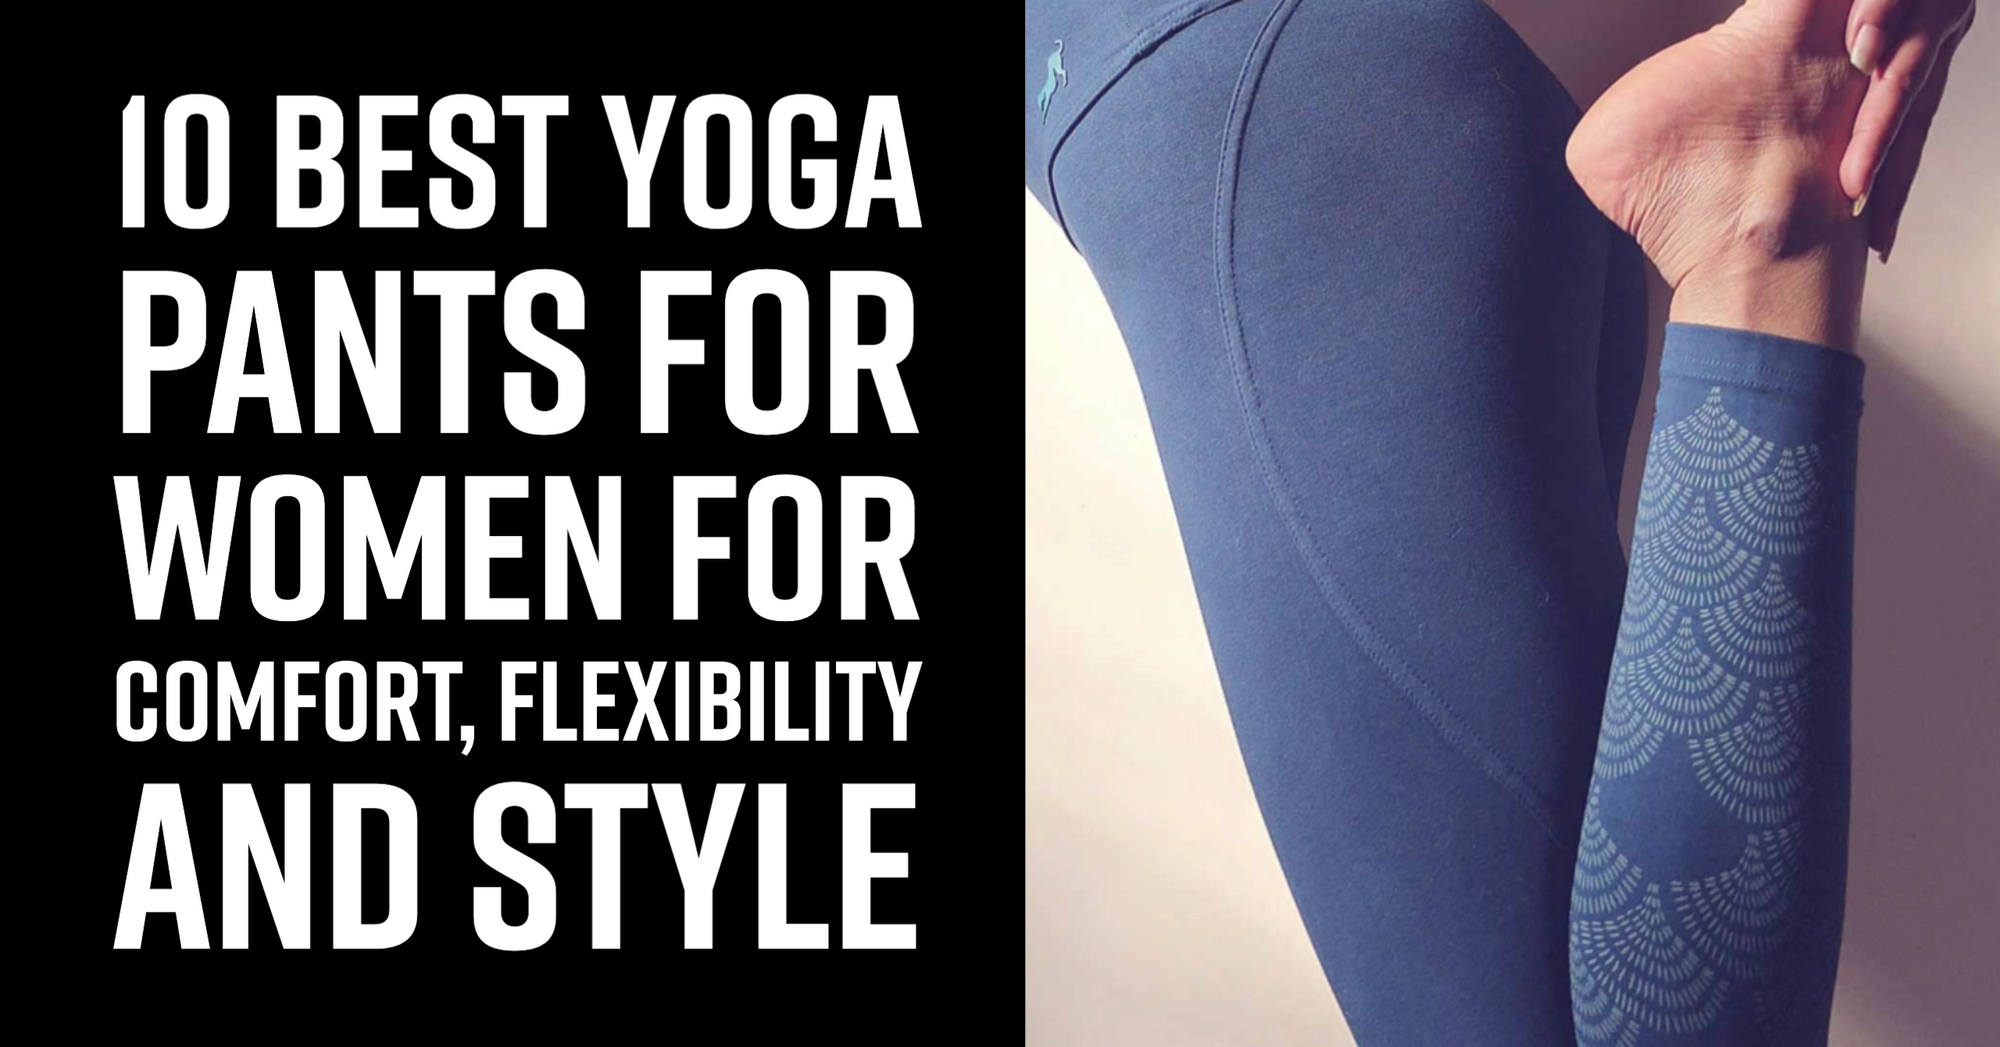 Share more than 77 best yoga pants - in.eteachers